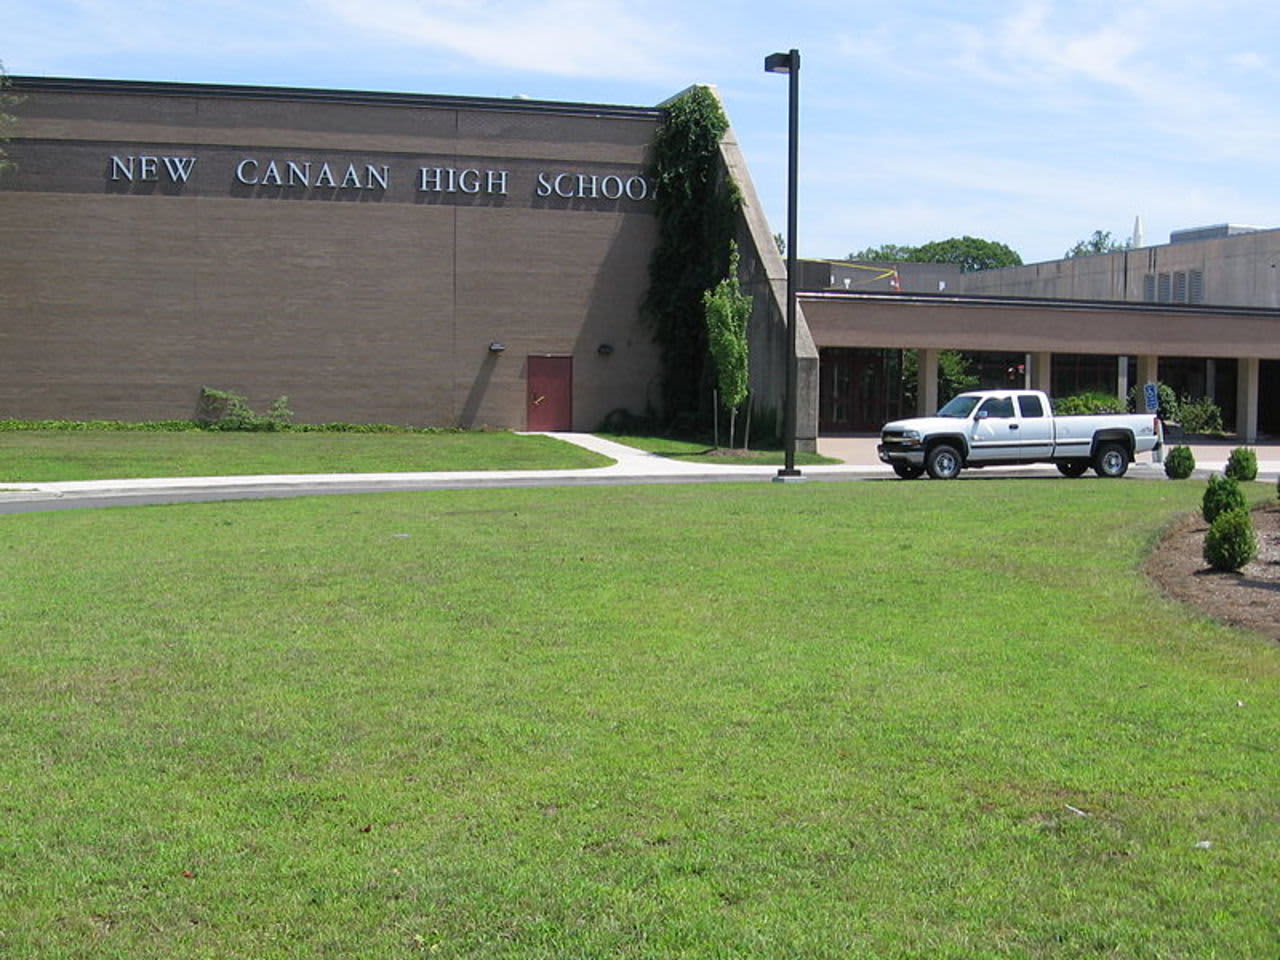 The artificial turf on the playing fields at New Canaan High School need to be replaced before the next season.